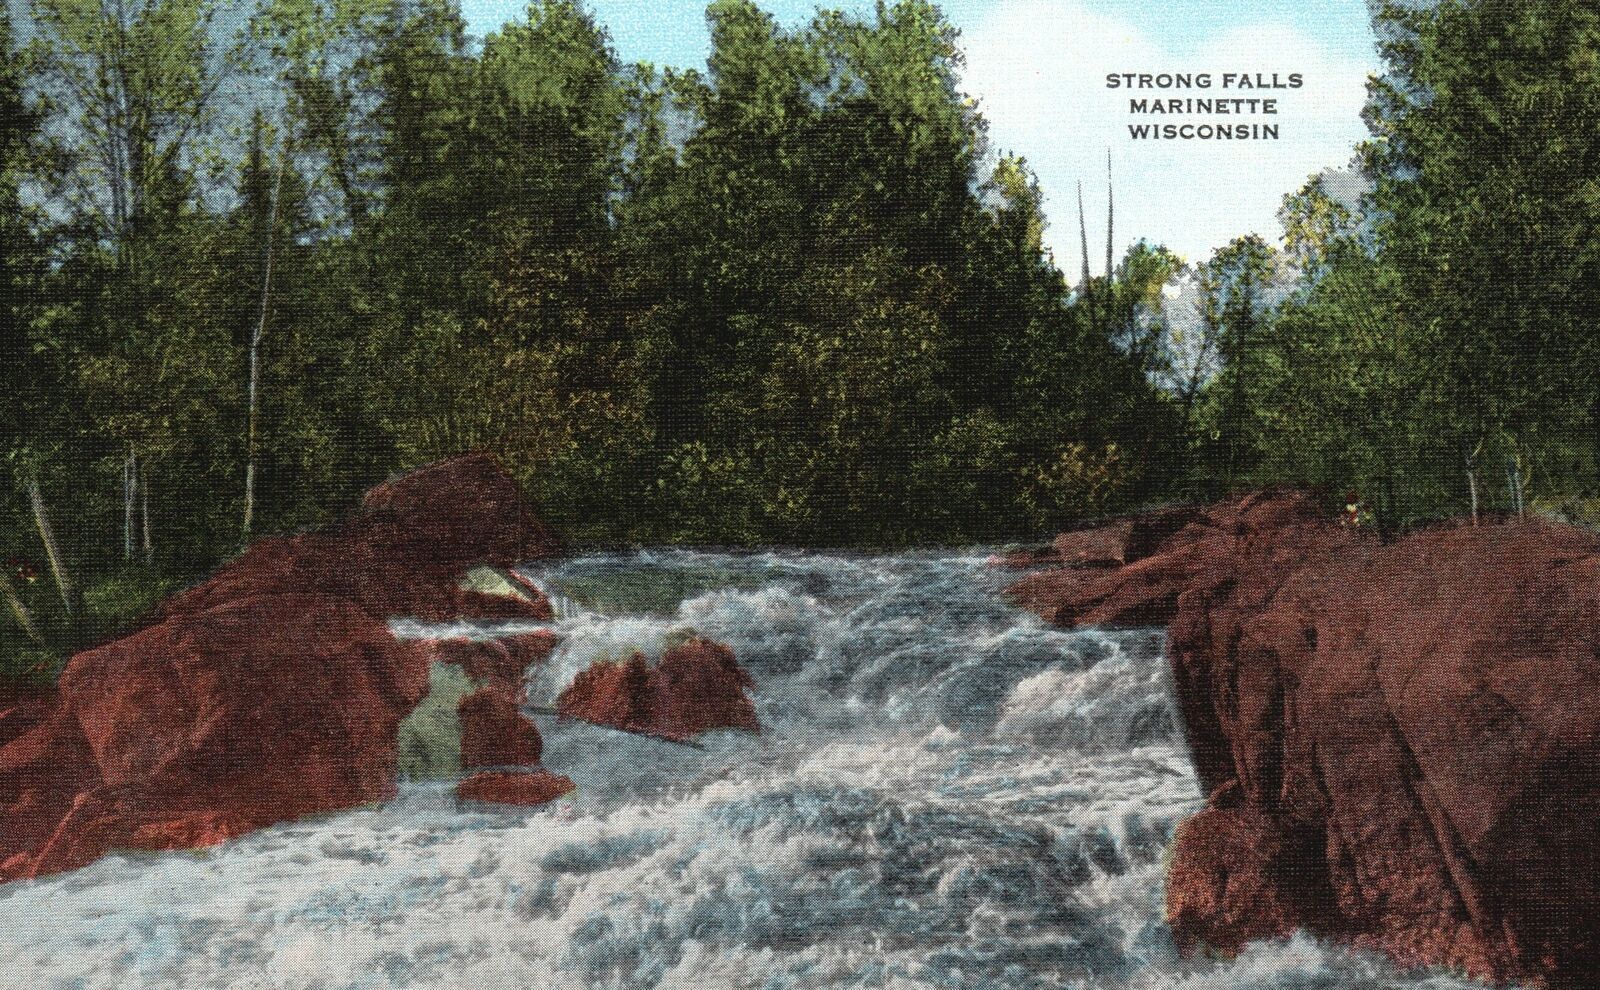 Vintage Postcard Strong Falls Picturesque Waterfall Marinette Wisconsin E.C. K.